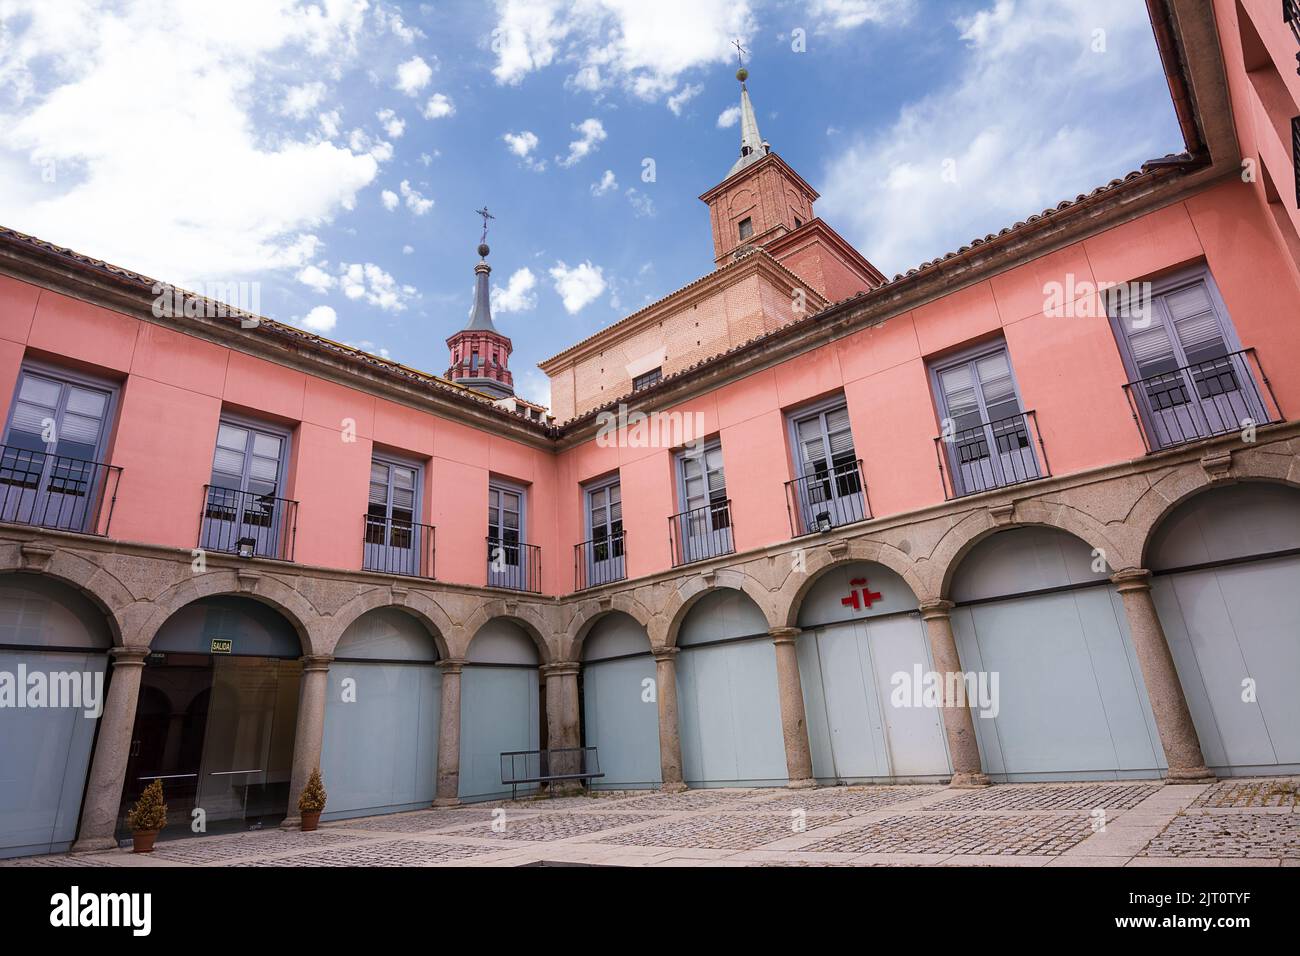 Alcalá de Henares, Spain - June 18, 2022: Internal courtyard of the Cervantes Institute of Alcalà de Henares and in the background the bell towers of Stock Photo